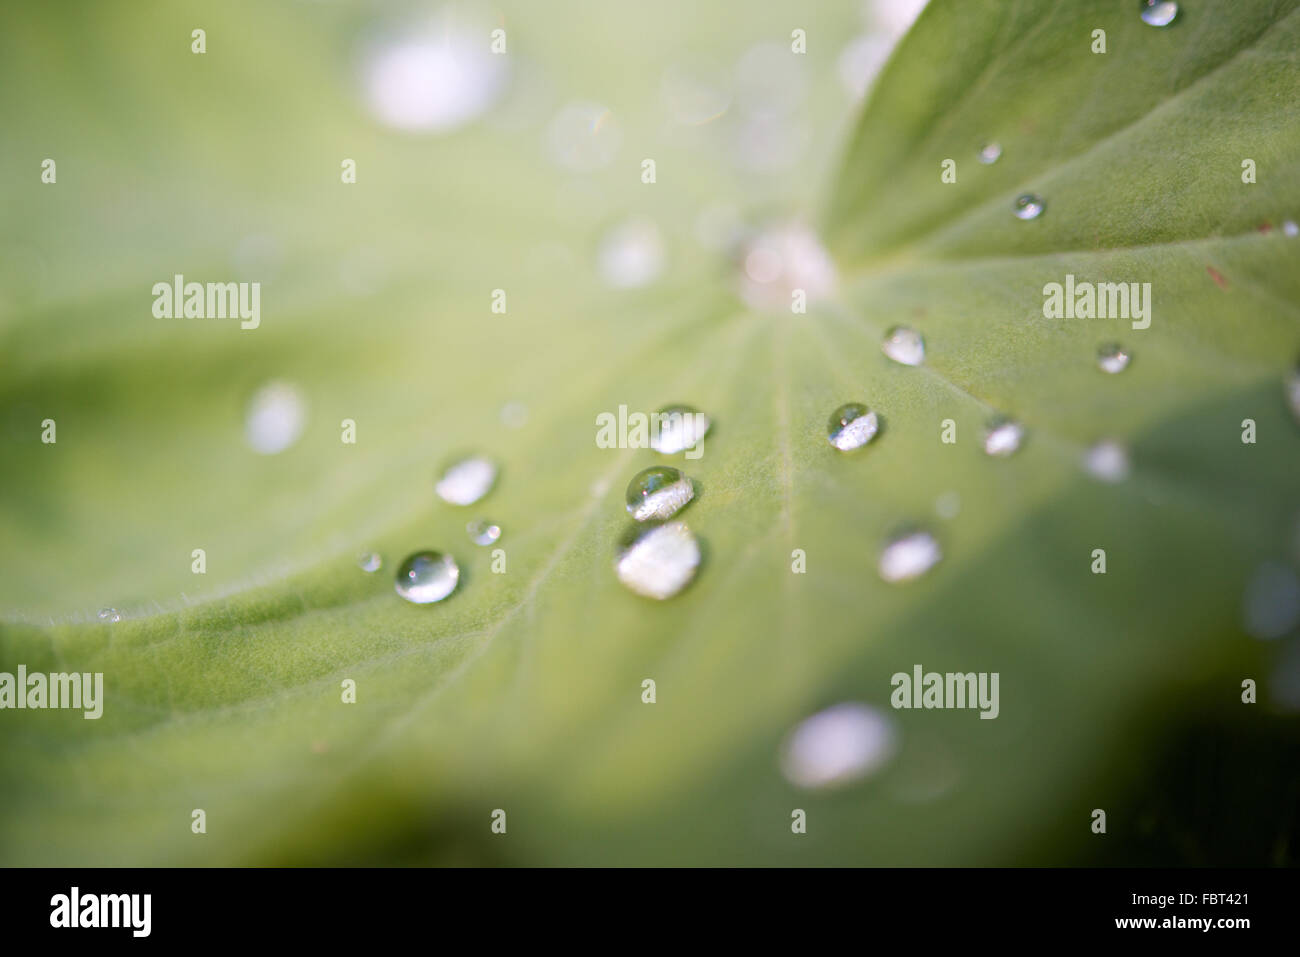 Close-up of dew drops on leaf Stock Photo